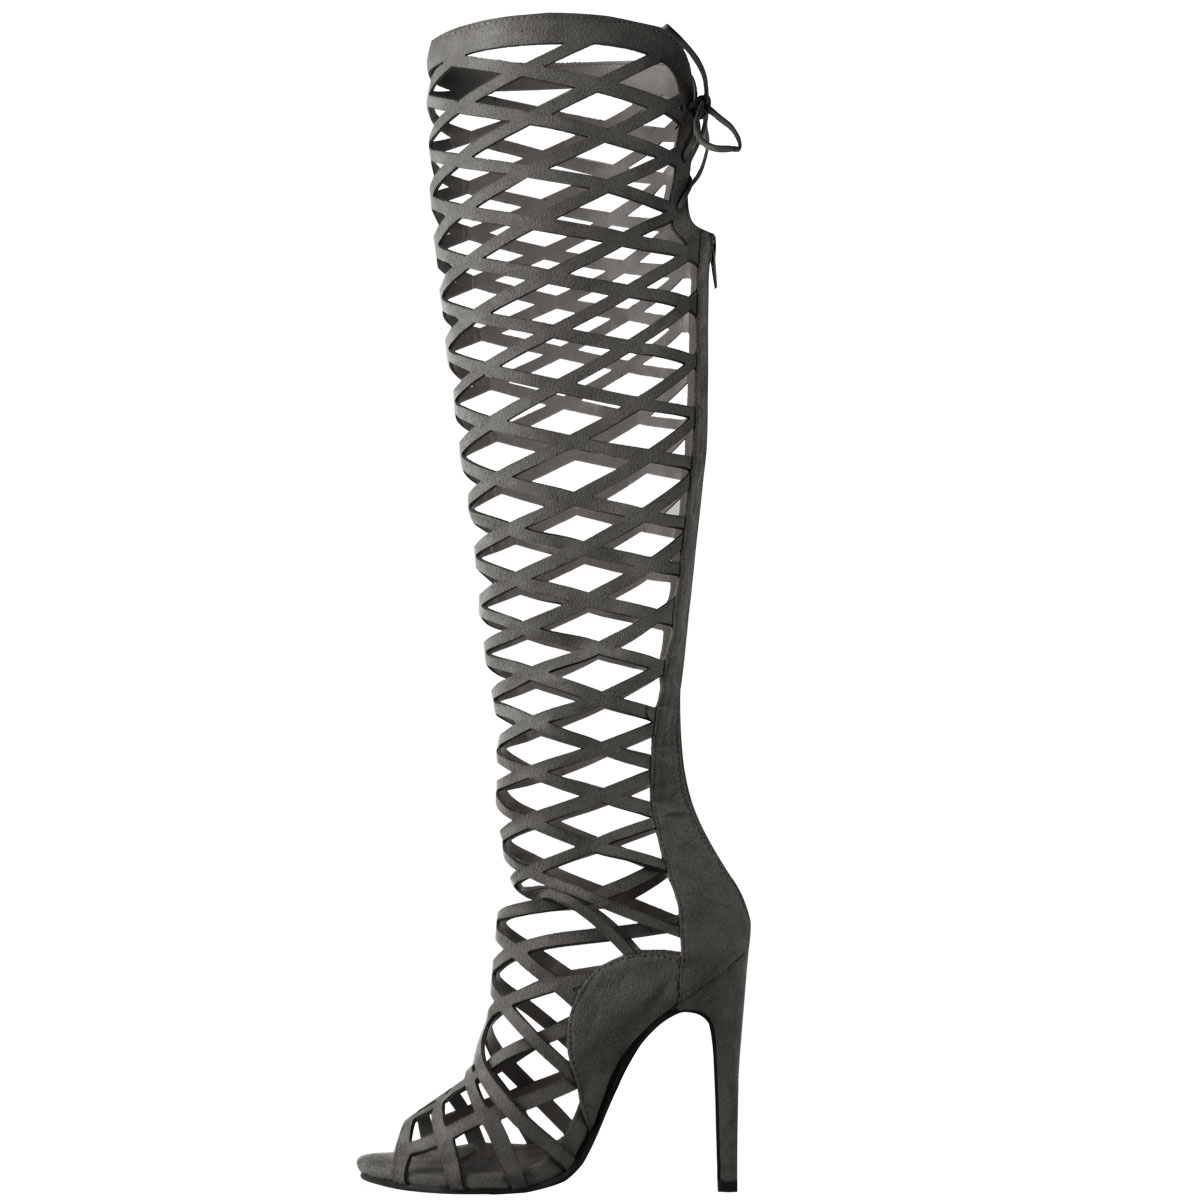 Ladies Womens Cut Out Lace Knee High Heel Boots Gladiator Sandals Strappy Size Ebay